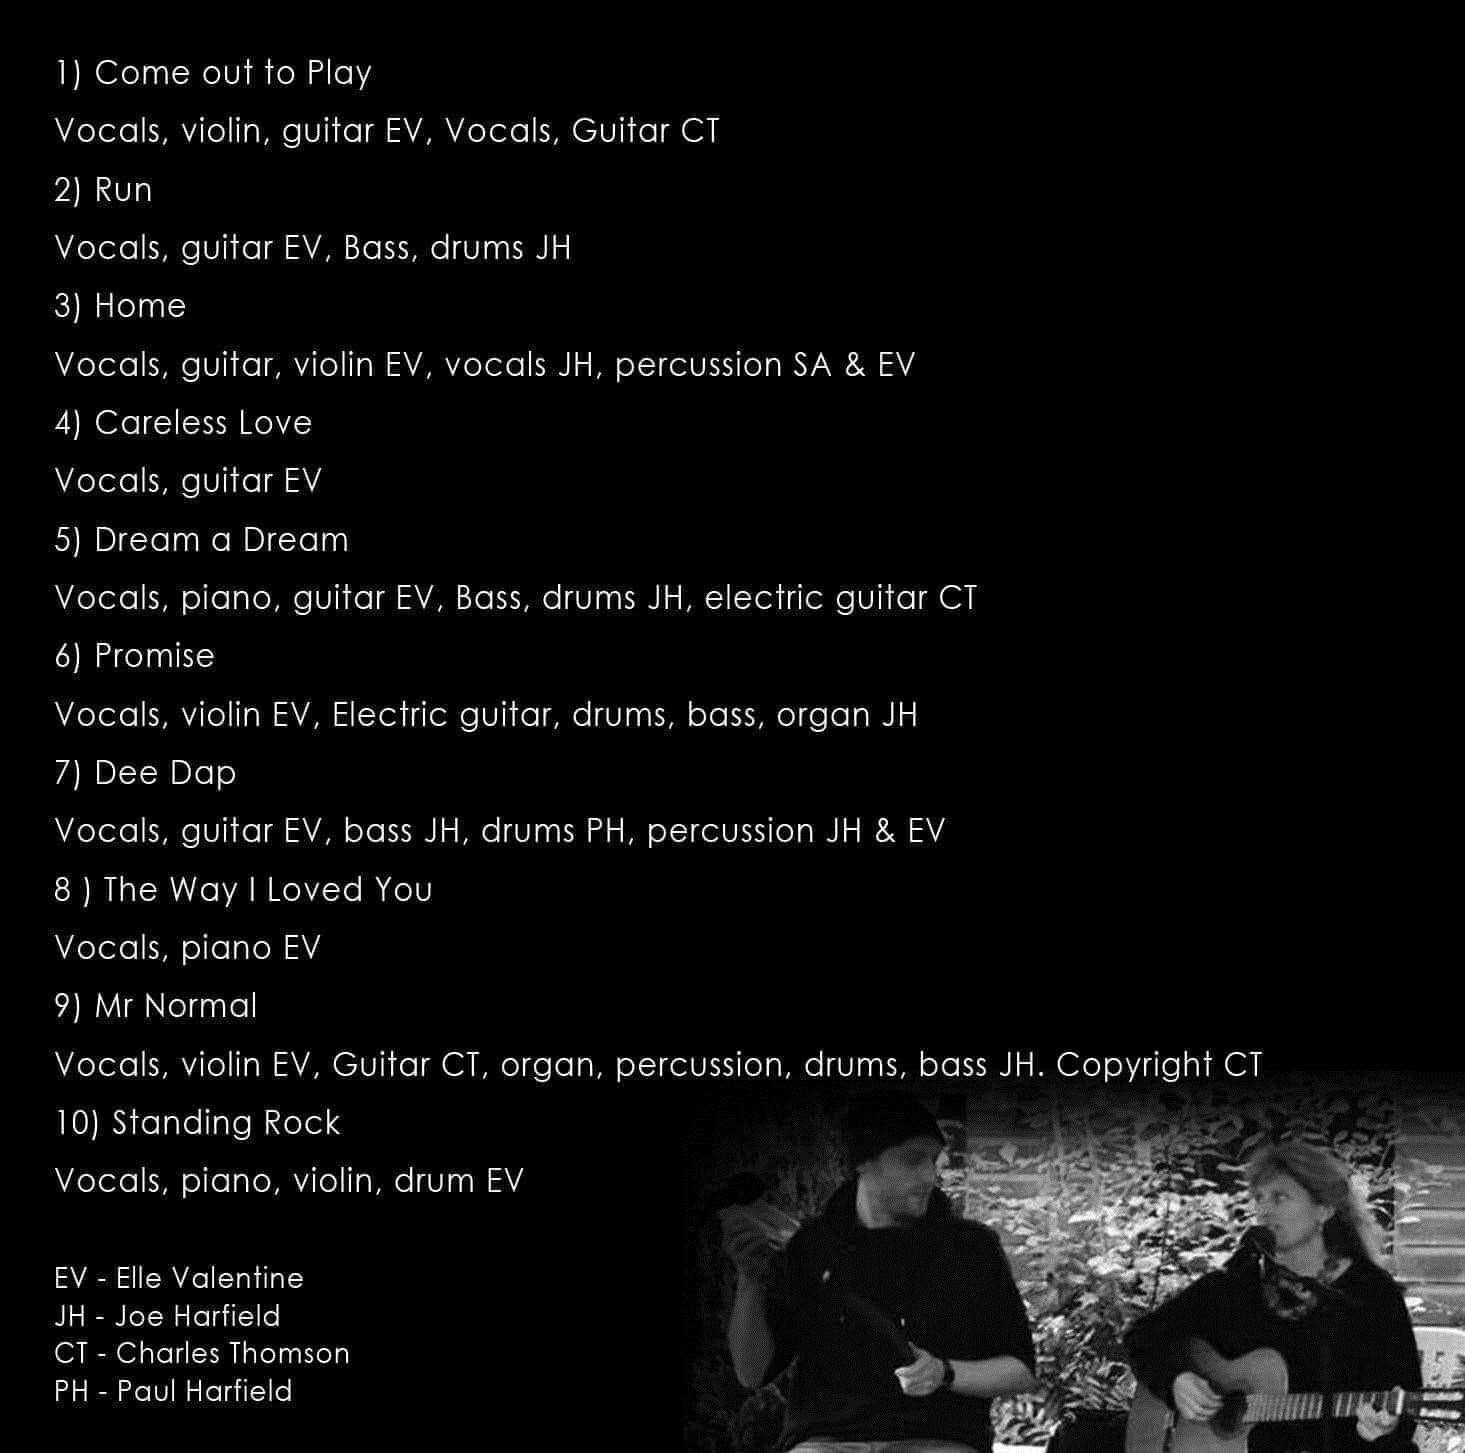 The back cover of the album - showing the ten songs on the album.